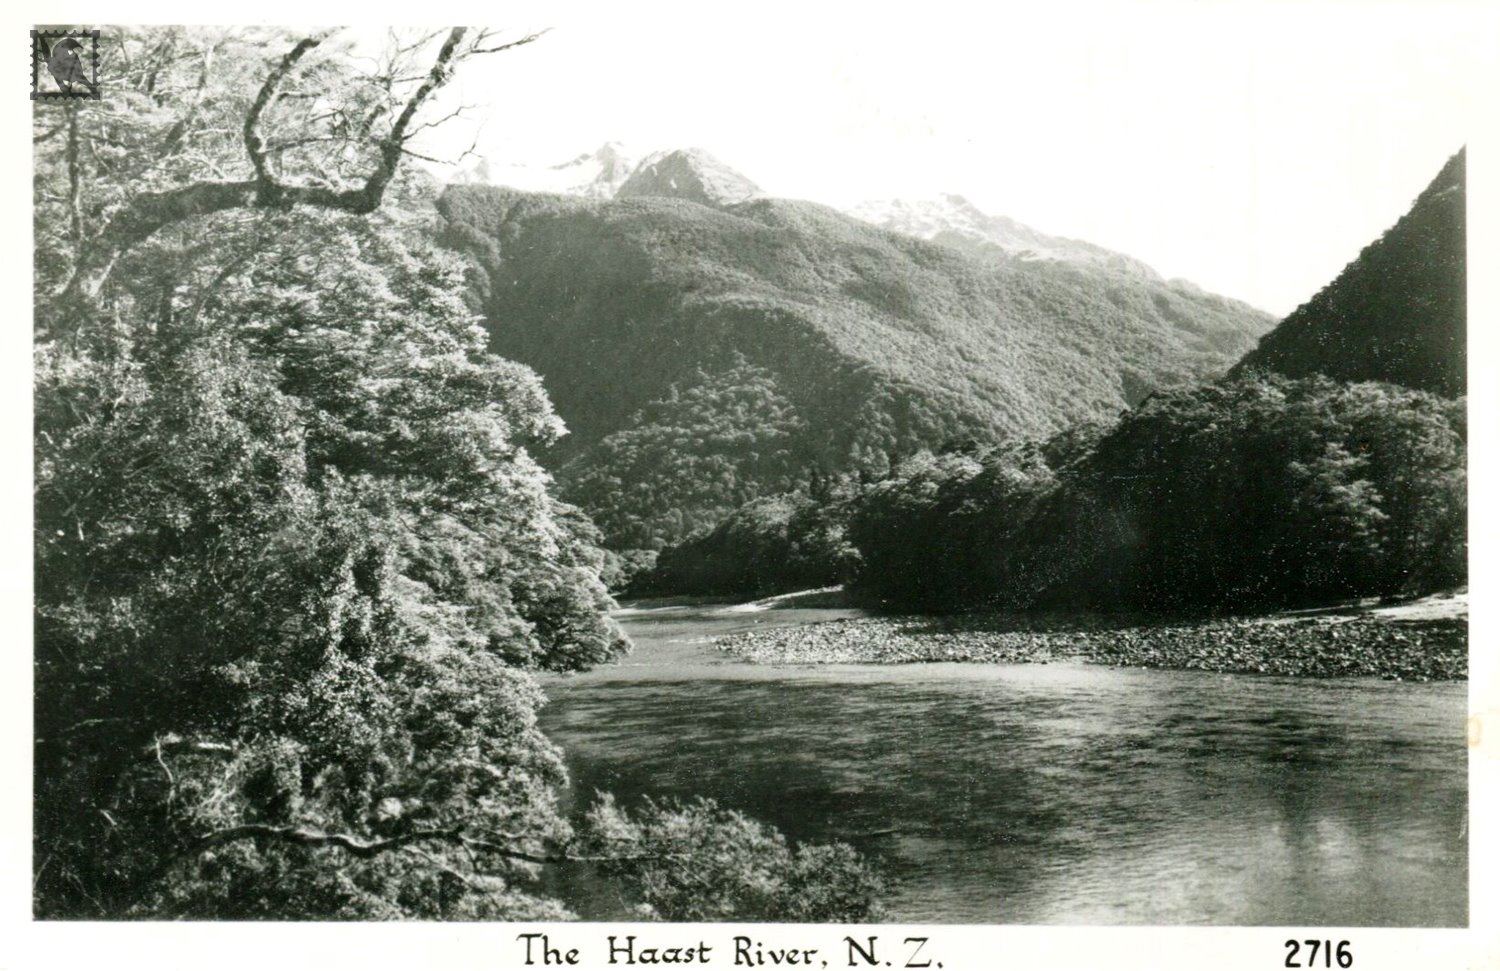 Westland - The Haast River